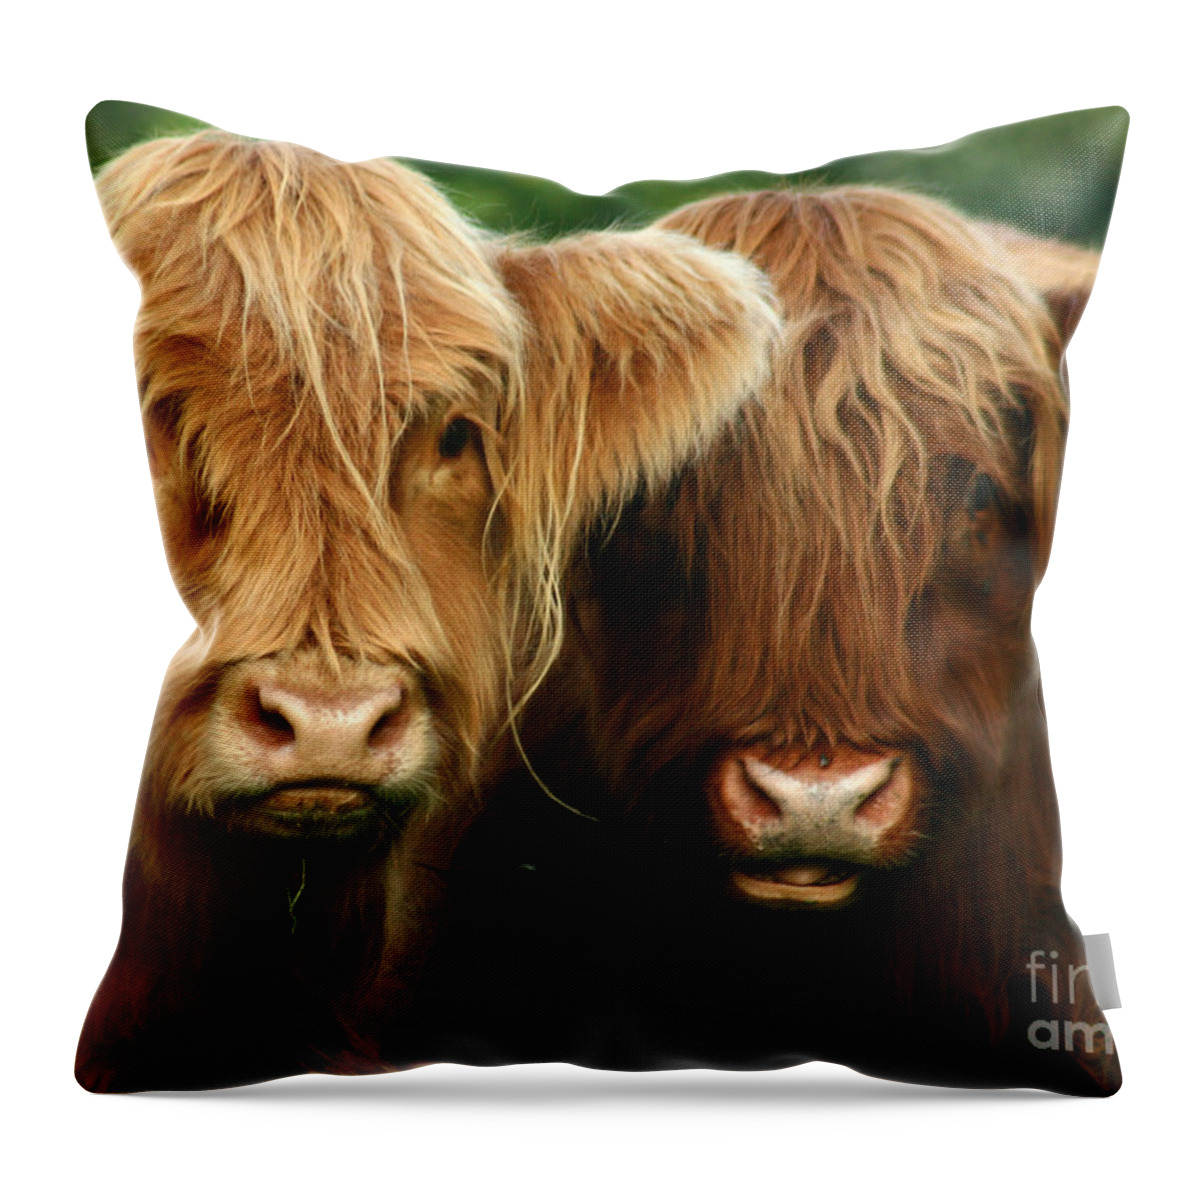 Cow Throw Pillow featuring the photograph Highland Cattle #4 by Ang El